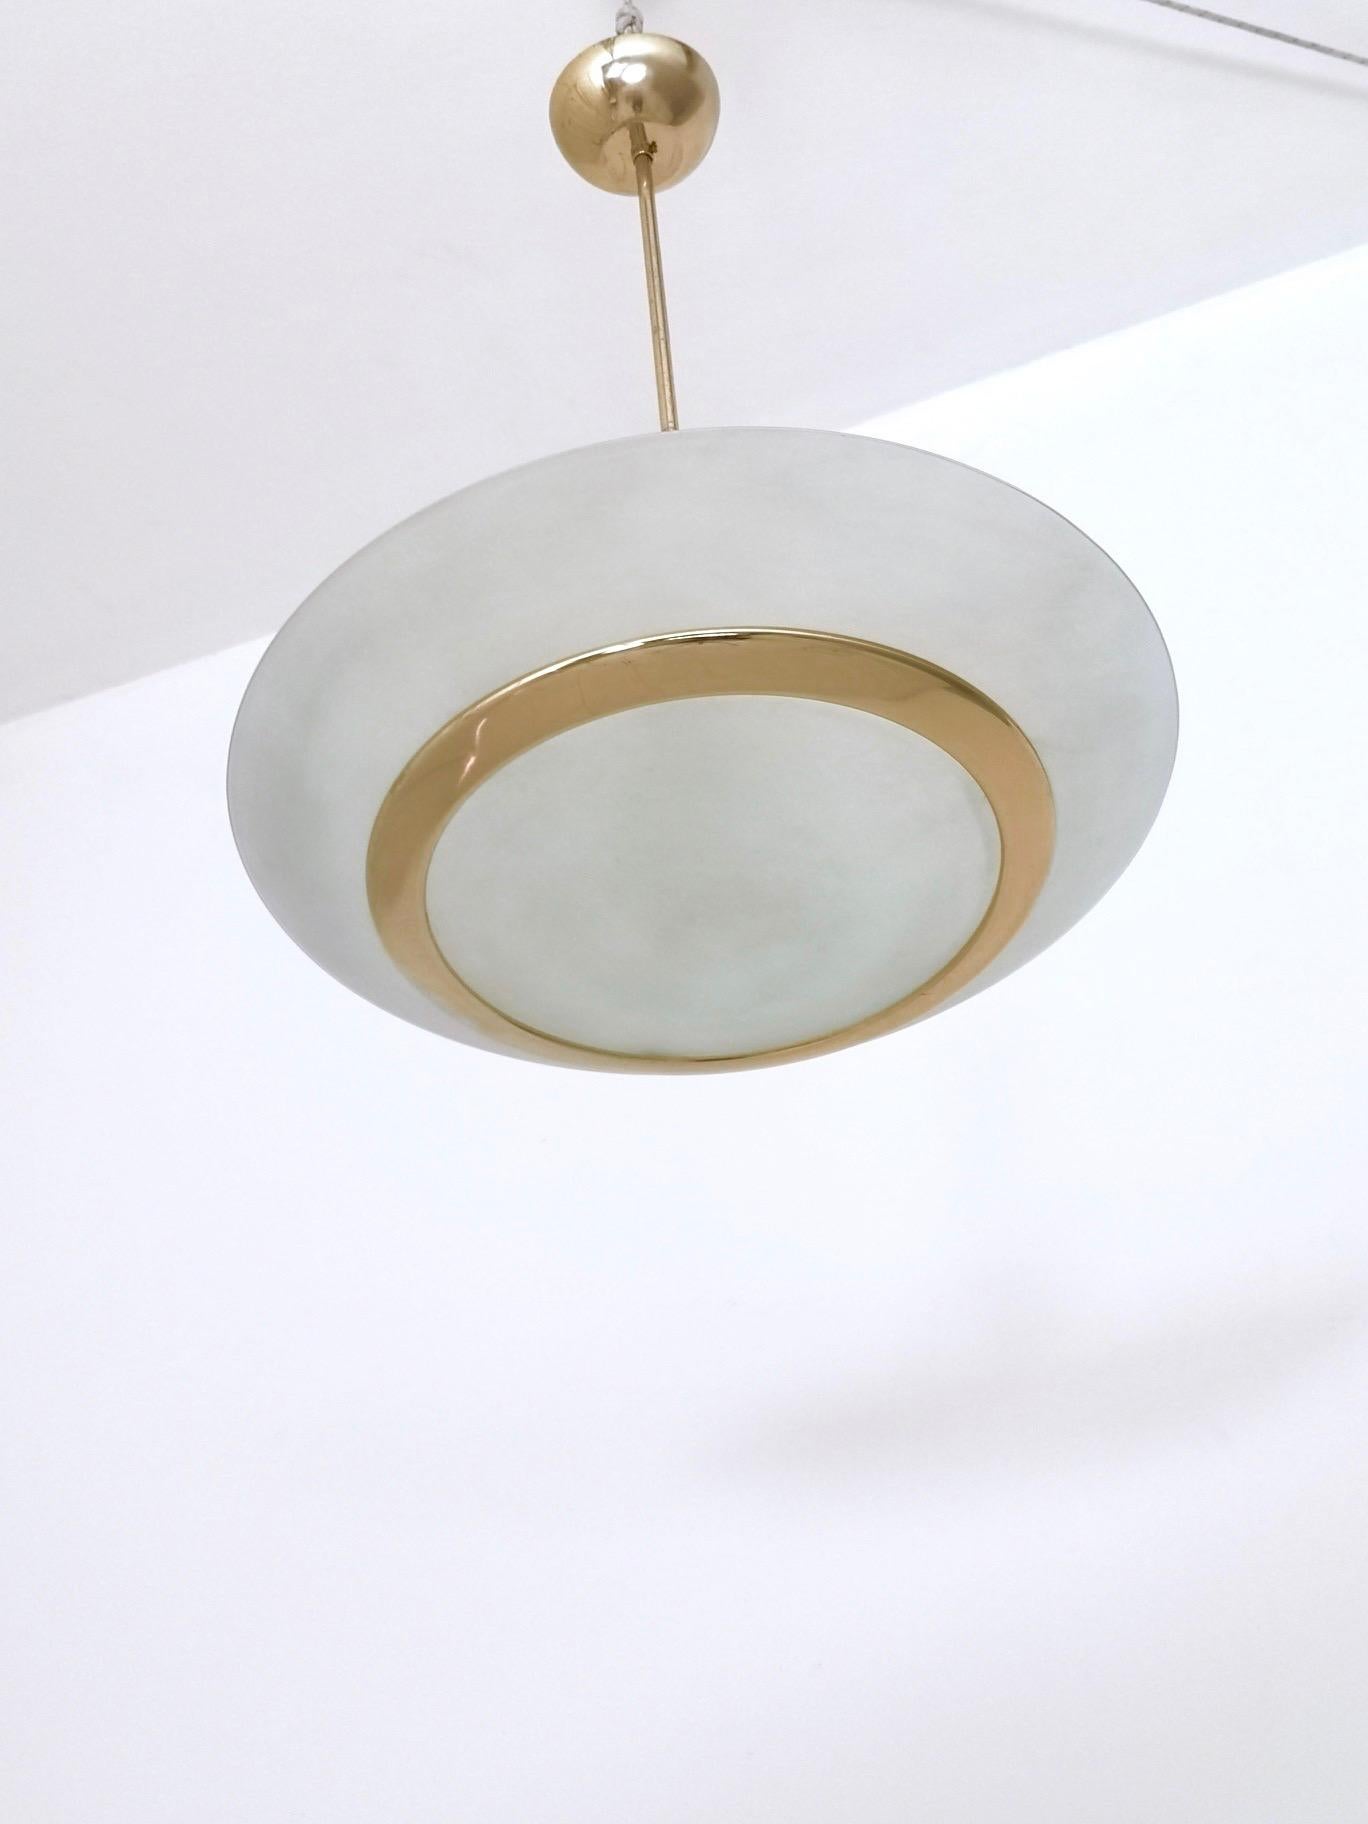 Brass and Etched Glass Bowl Pendant in the Style of Fontana Arte, Italy 1980s For Sale 1